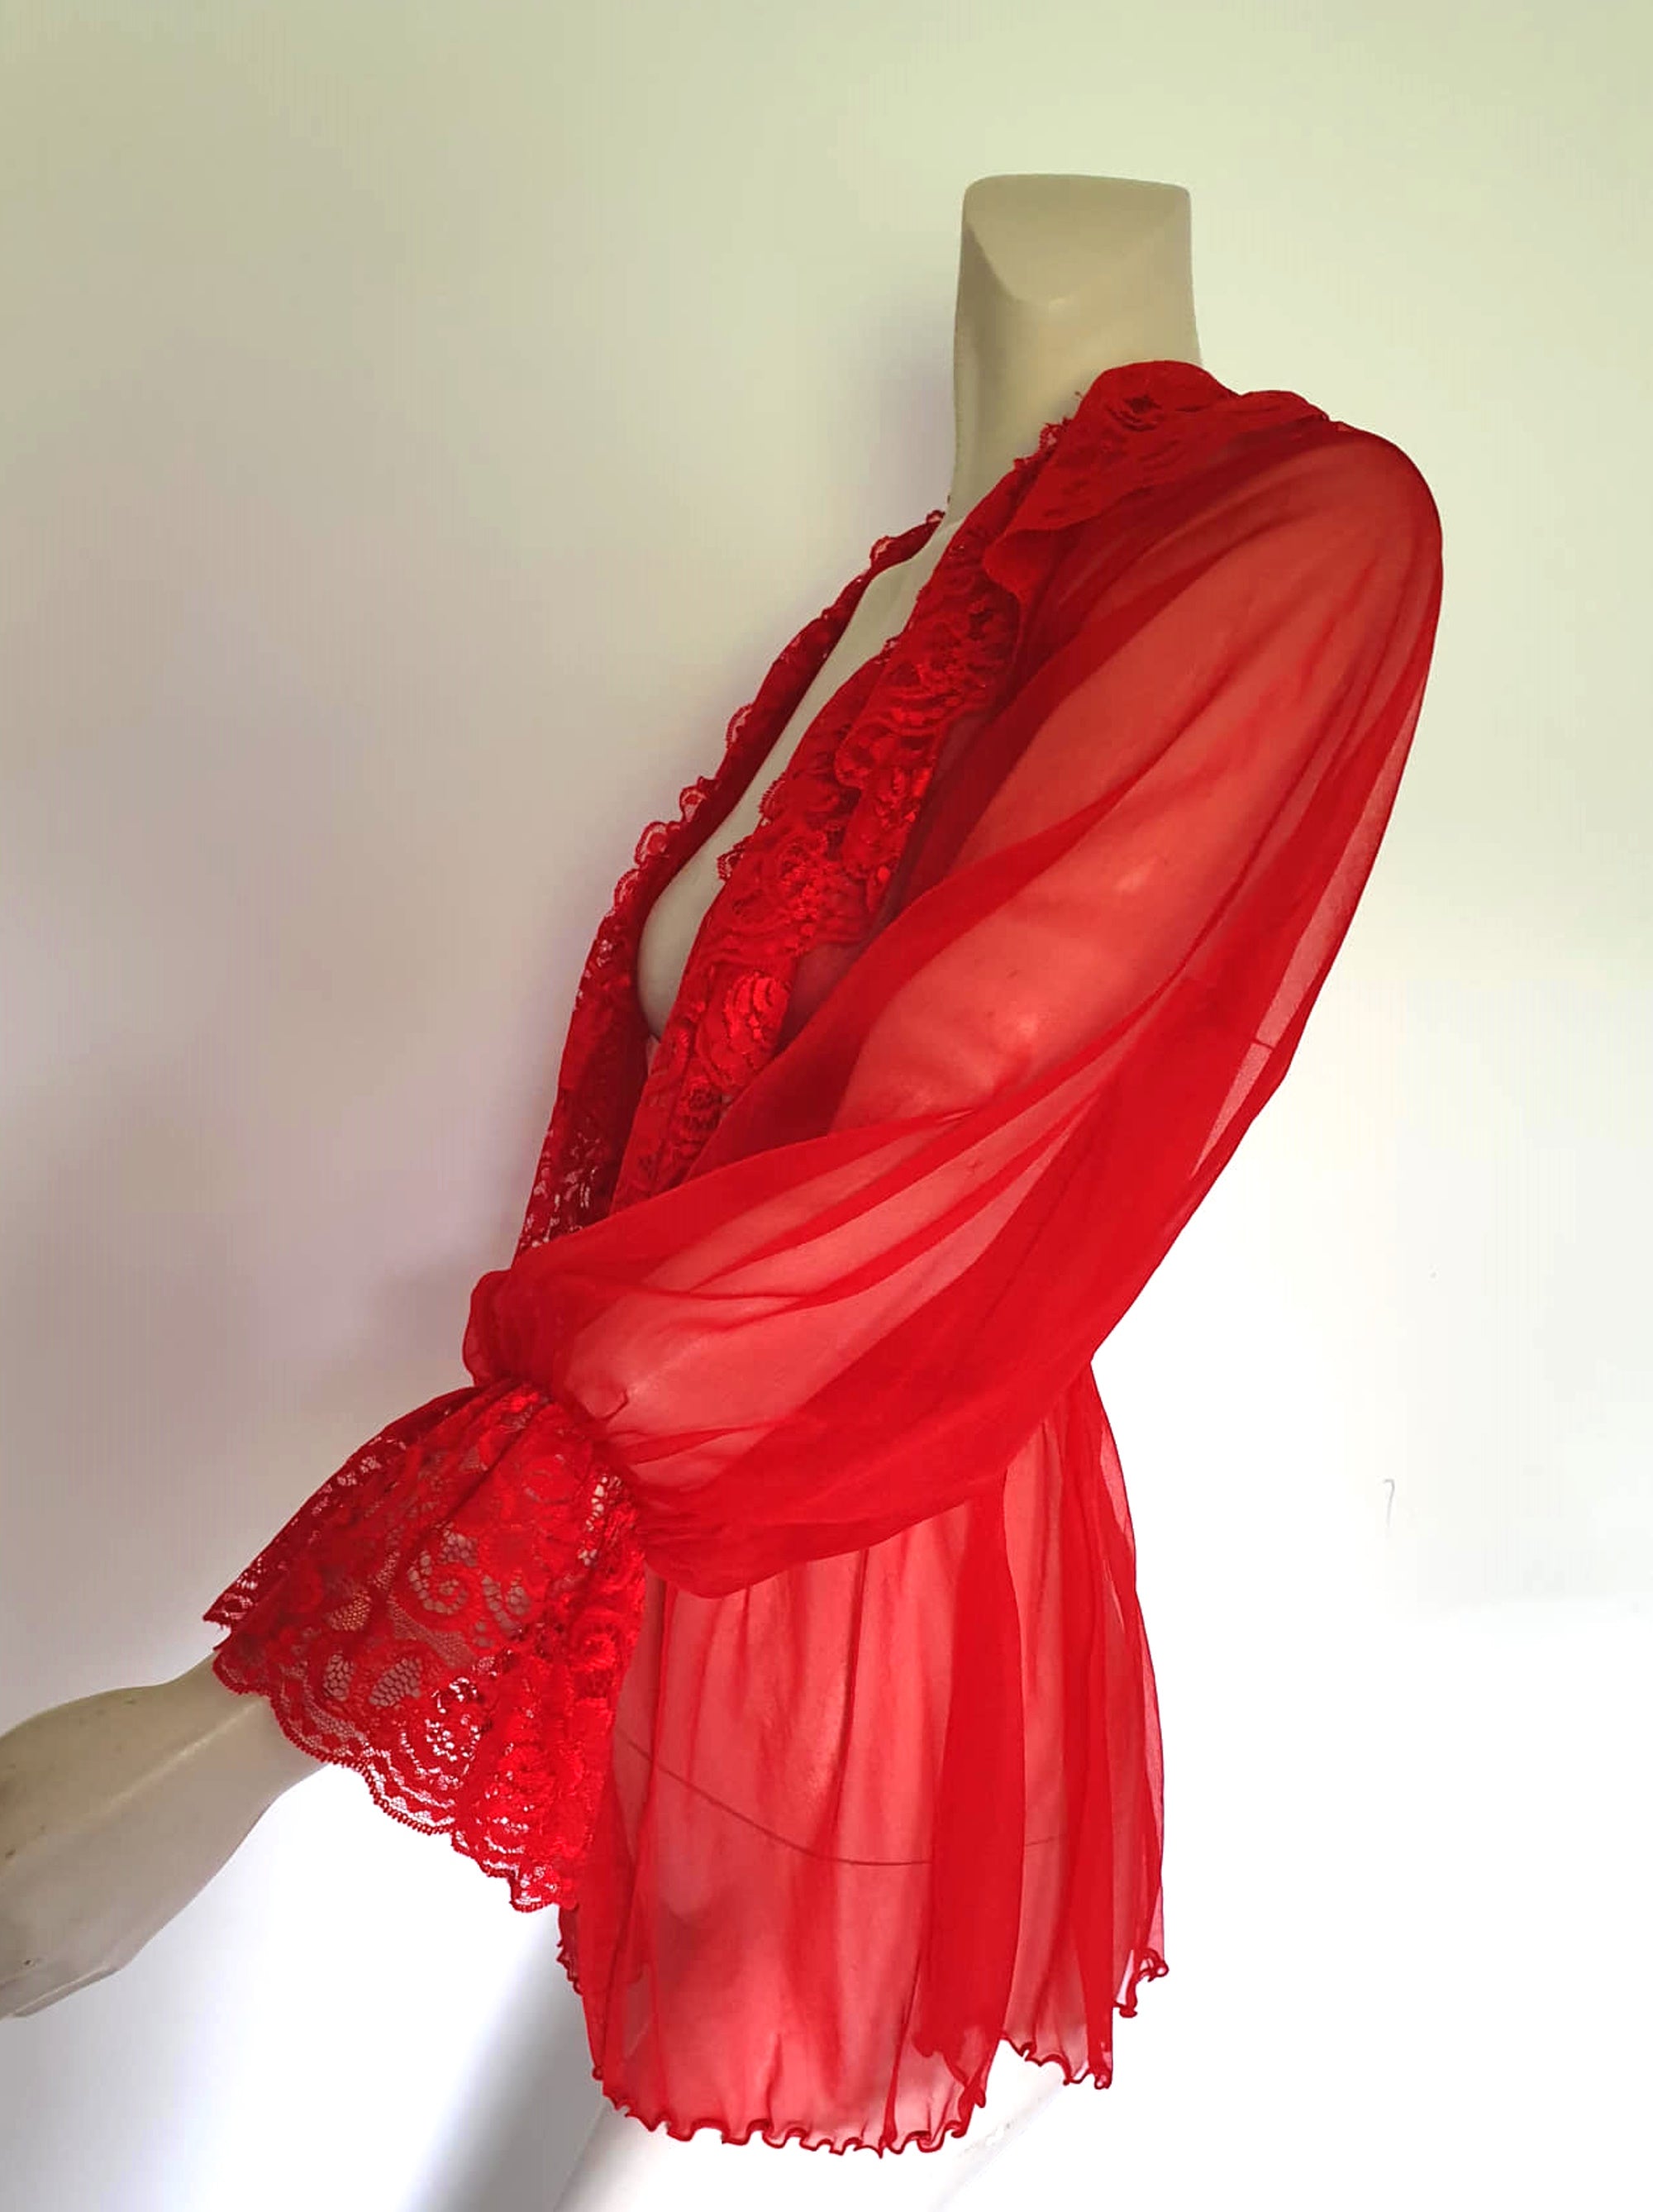 Sheer red mini robe with plunging neckline and ruffles M to L